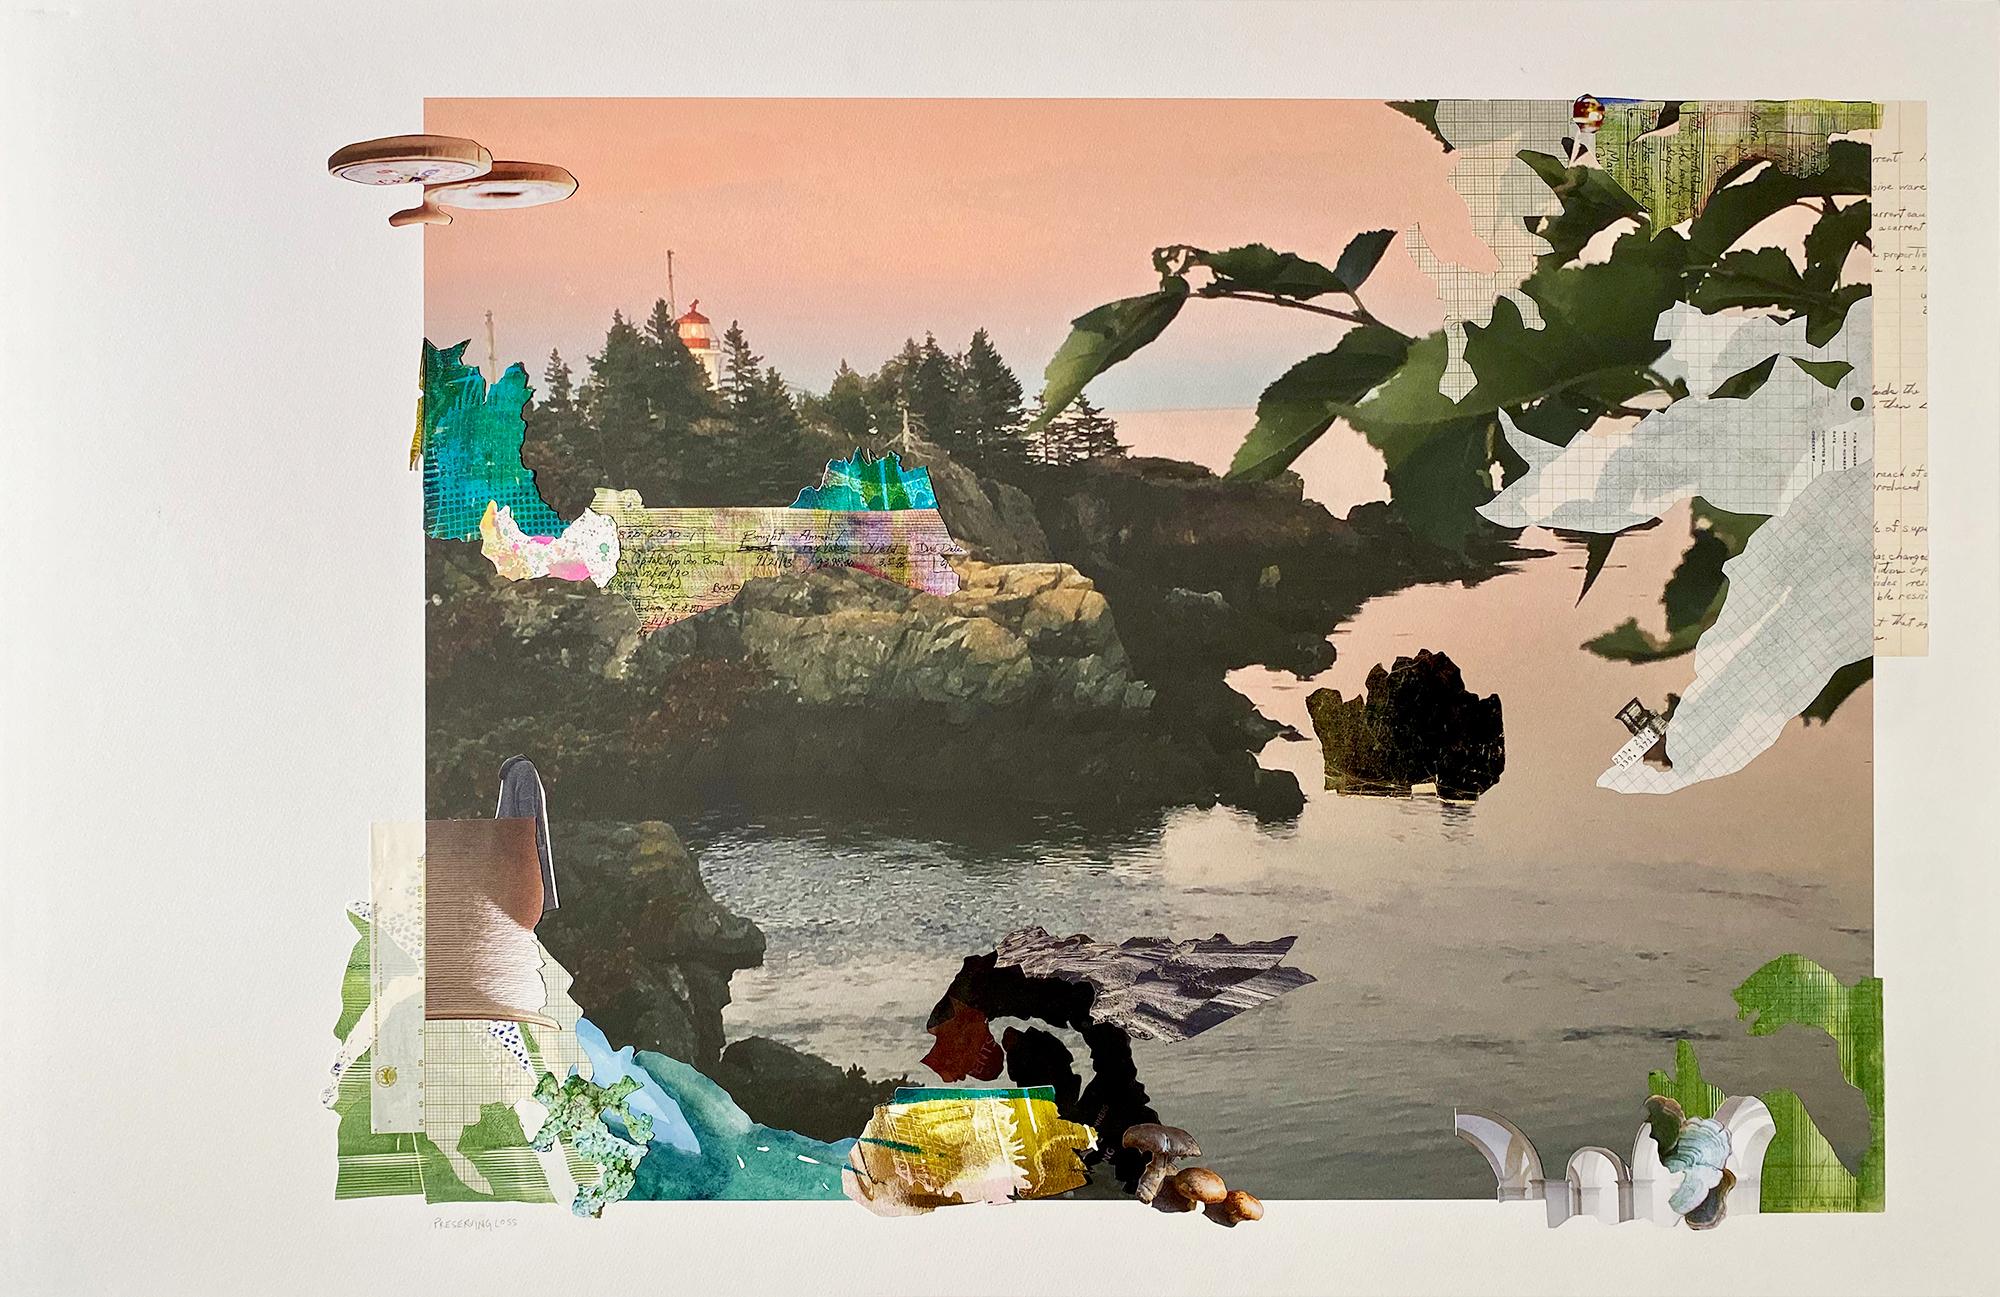 Monica DeSalvo’s “Preserving Loss” is a diptych with two 24 x 36 inch surreal collages on digital photos printed on watercolor paper. A calm ocean at sunset with pink orange skies blend with gray water pooling around black rocky outcroppings and a